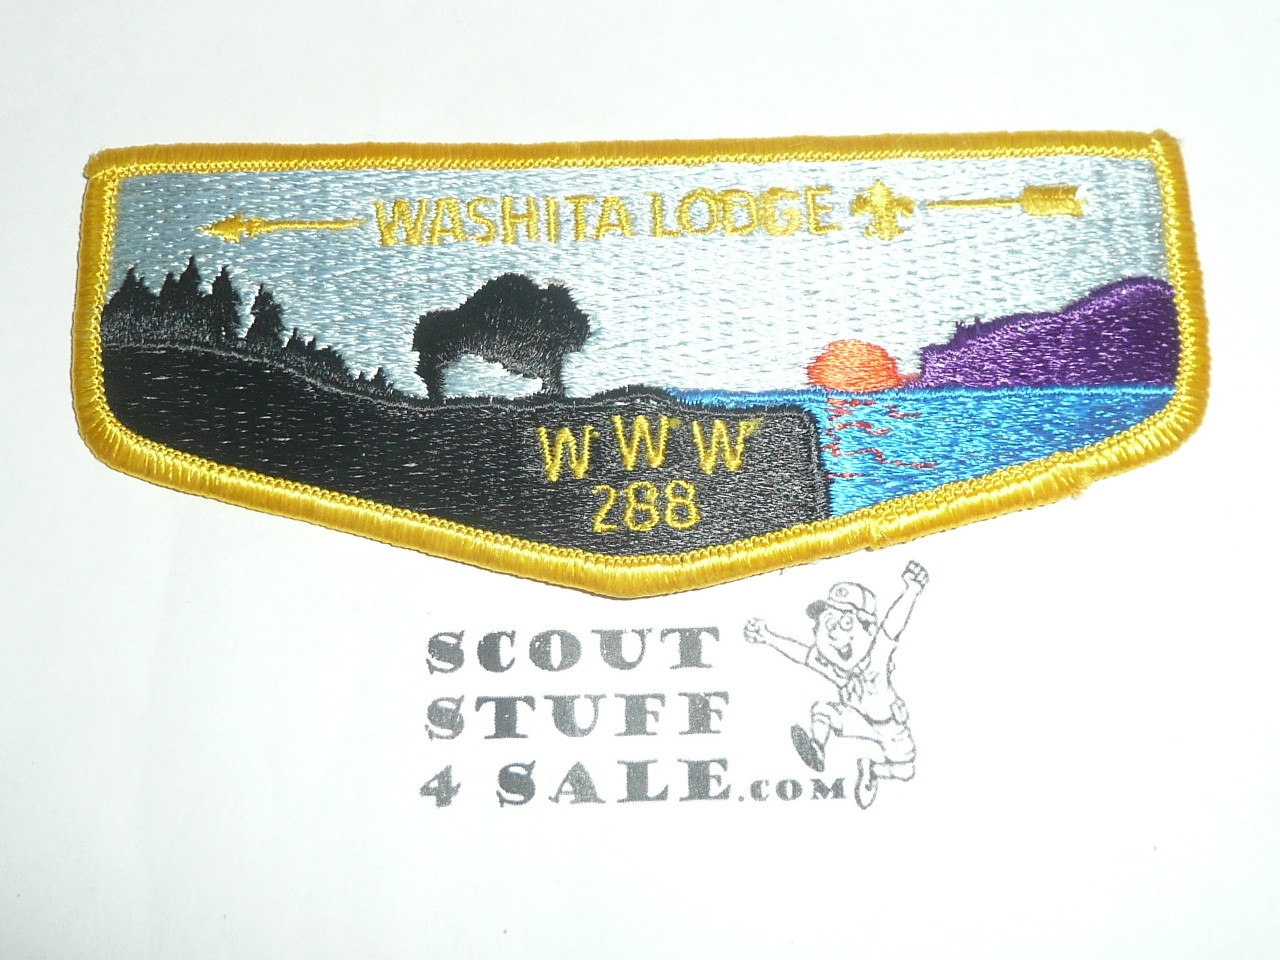 Order of the Arrow Lodge #288 Washita s6 Flap Patch